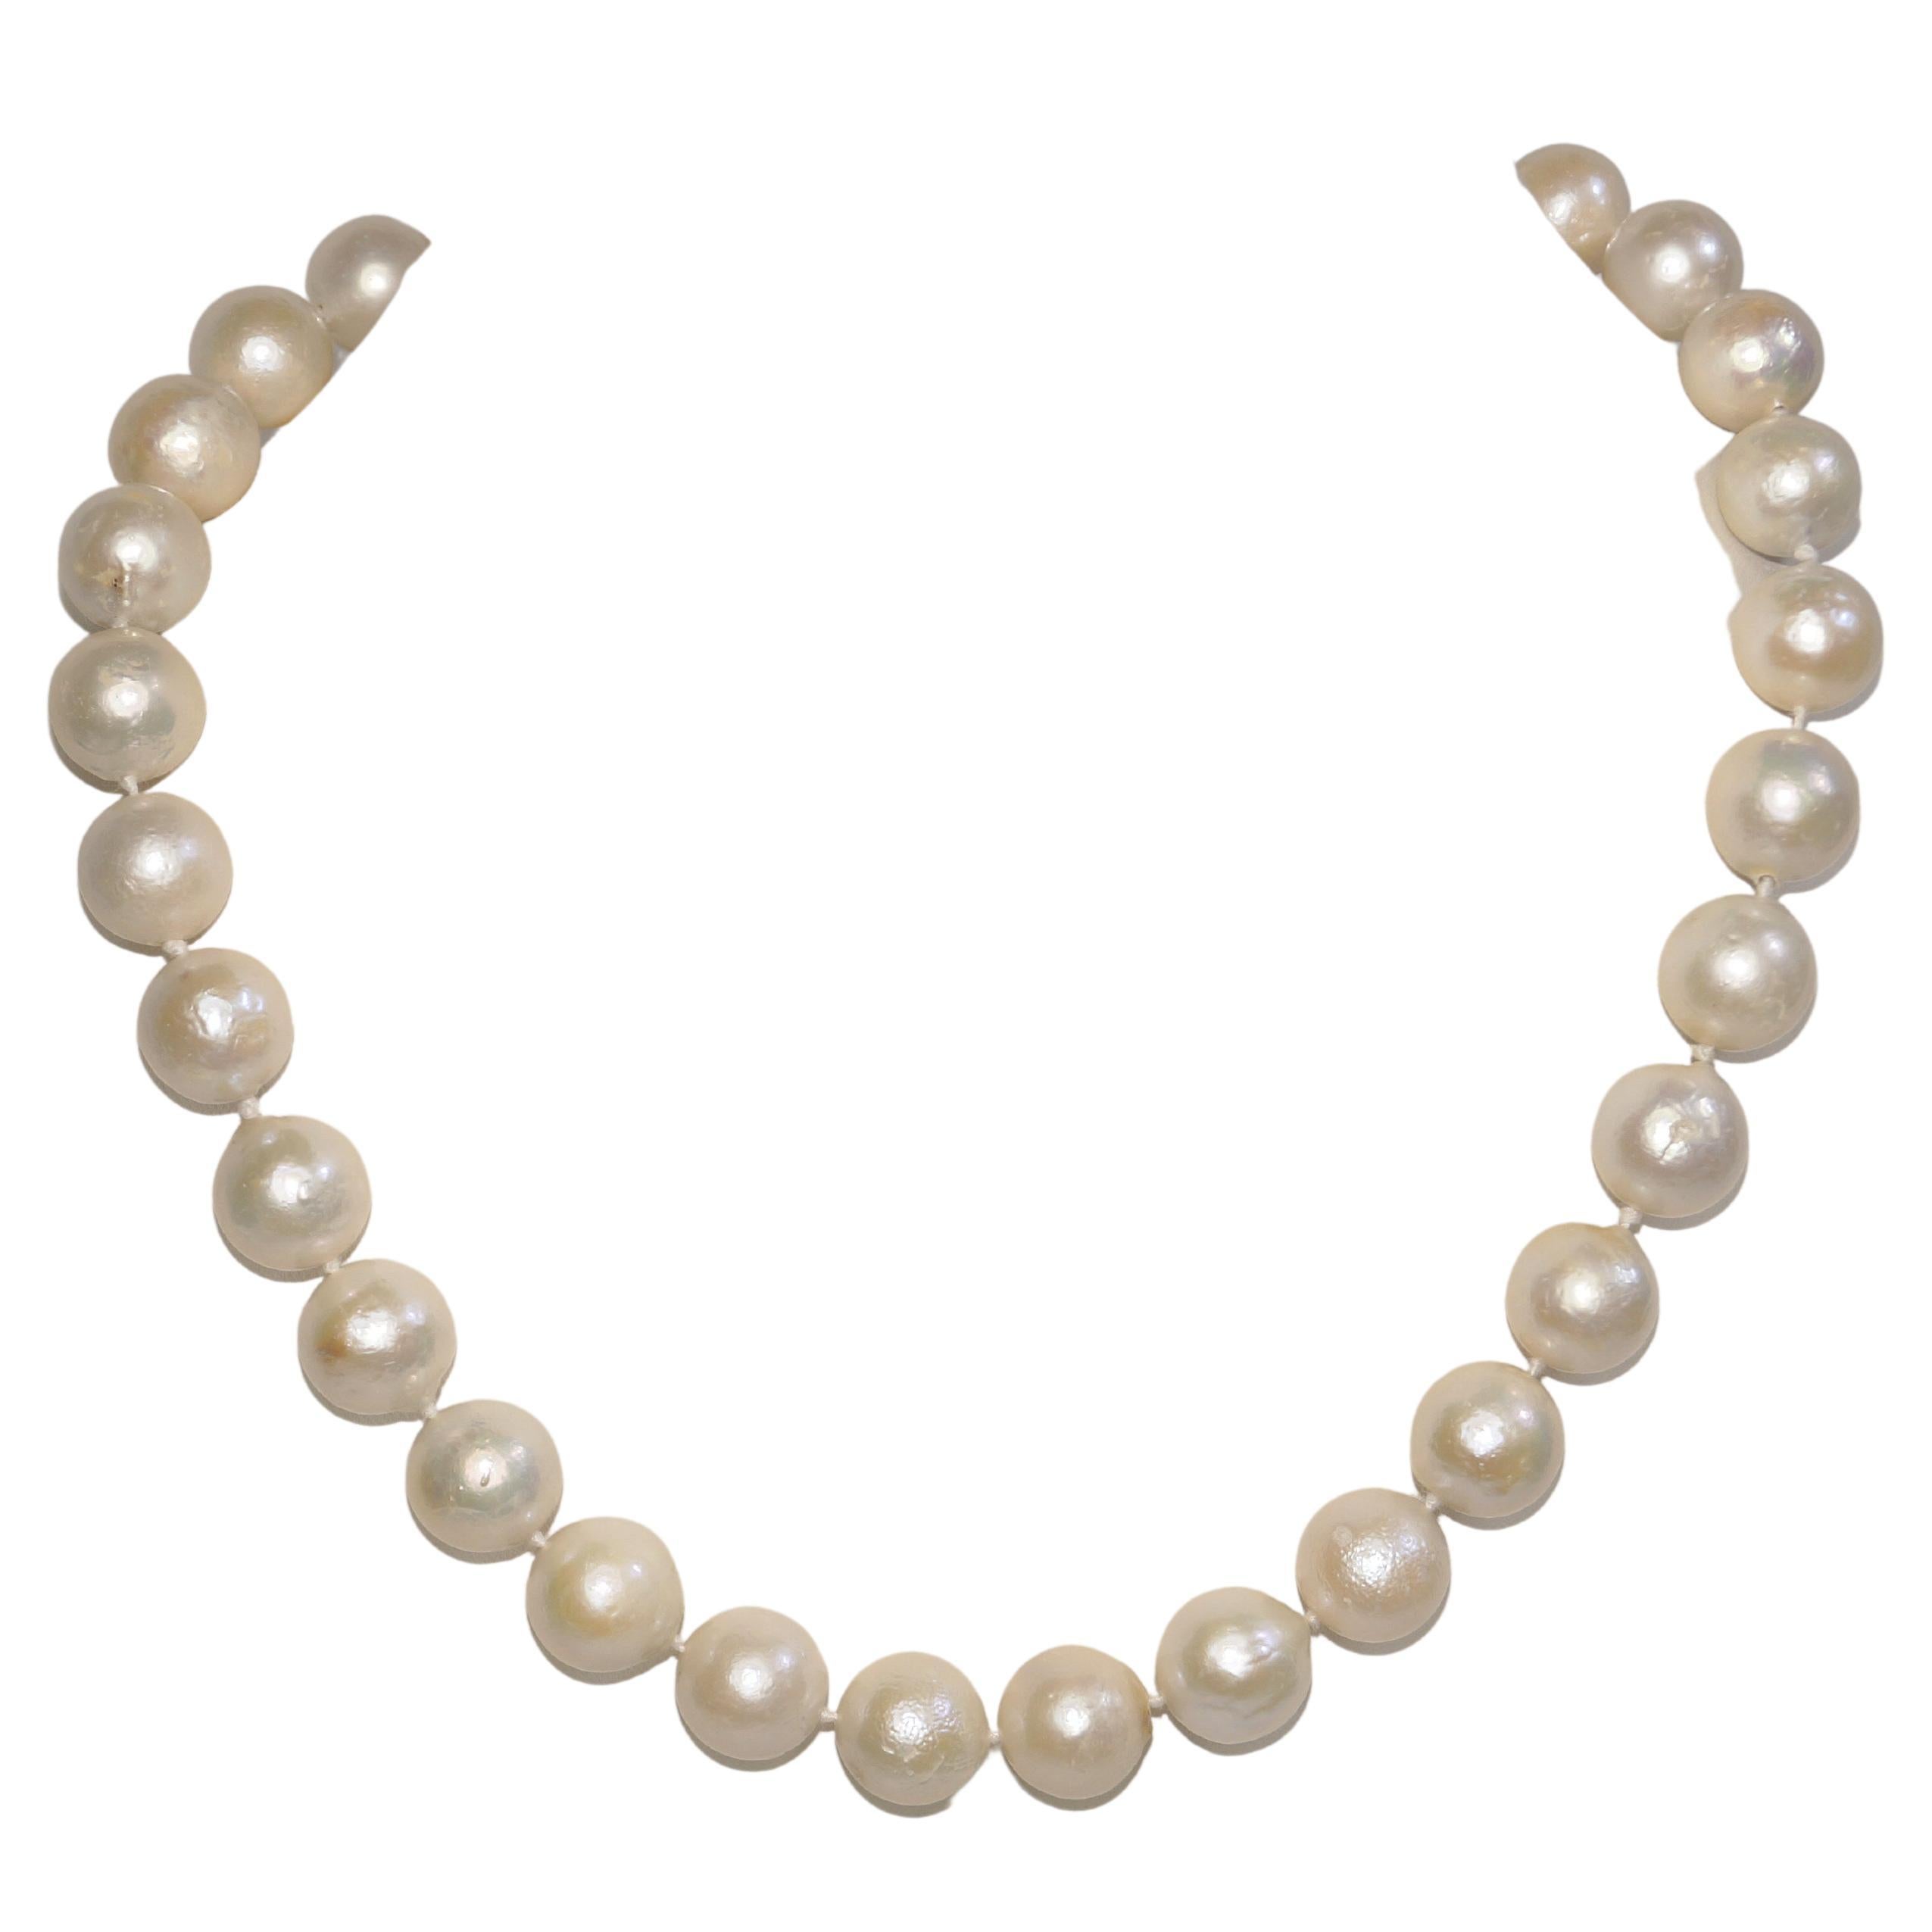 14k Gold South Sea Pearl necklace 12-15mm Big Round Wedding necklace  For Sale